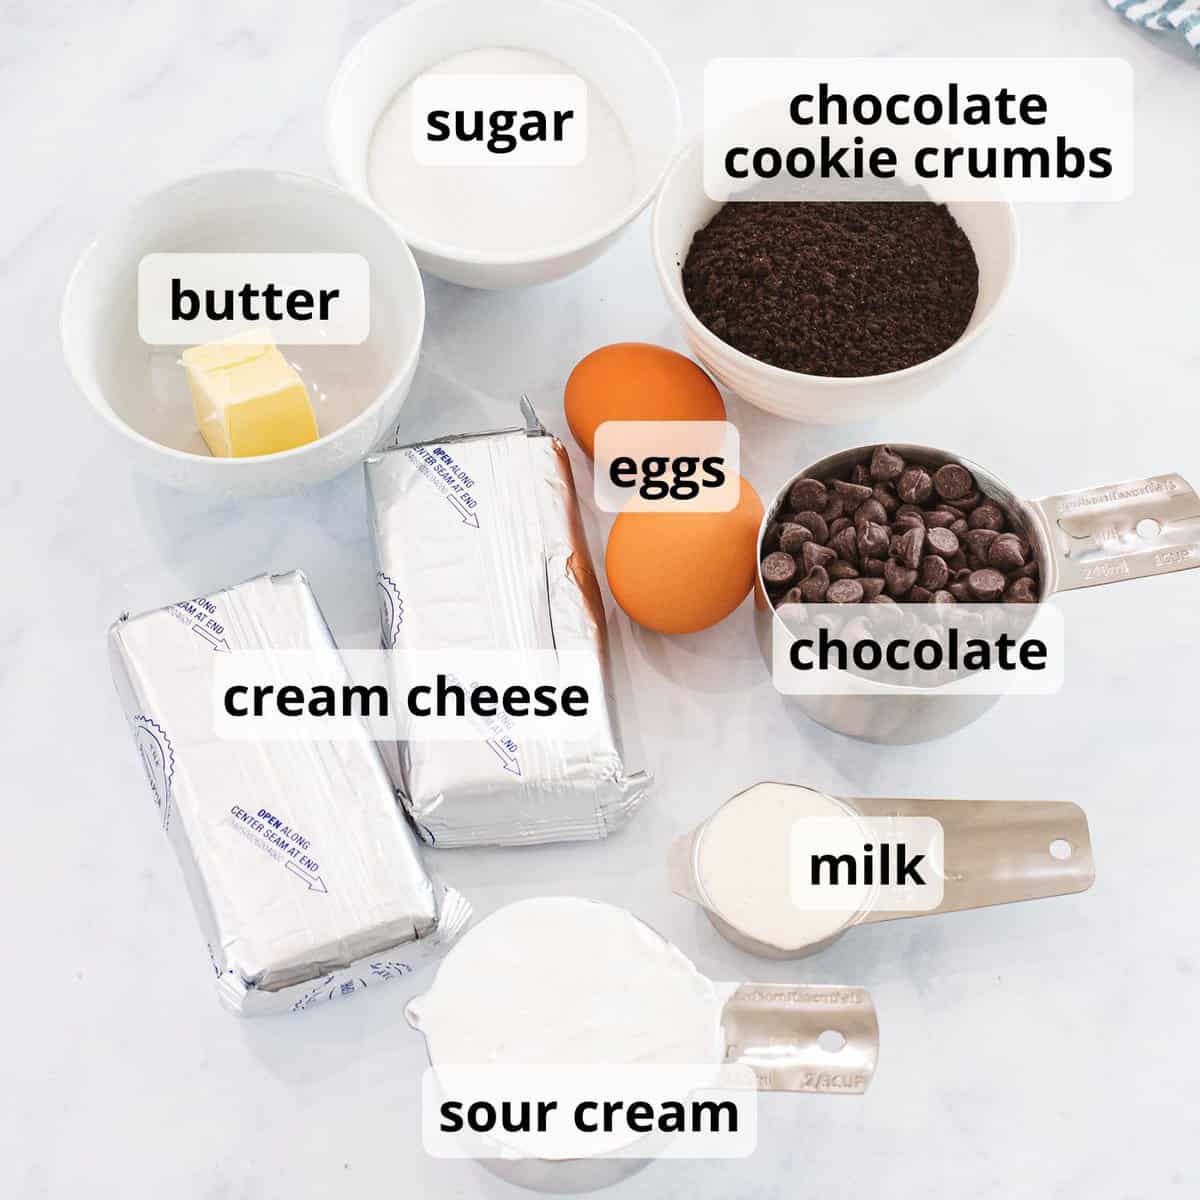 Chocolate cheesecake ingredients with text.